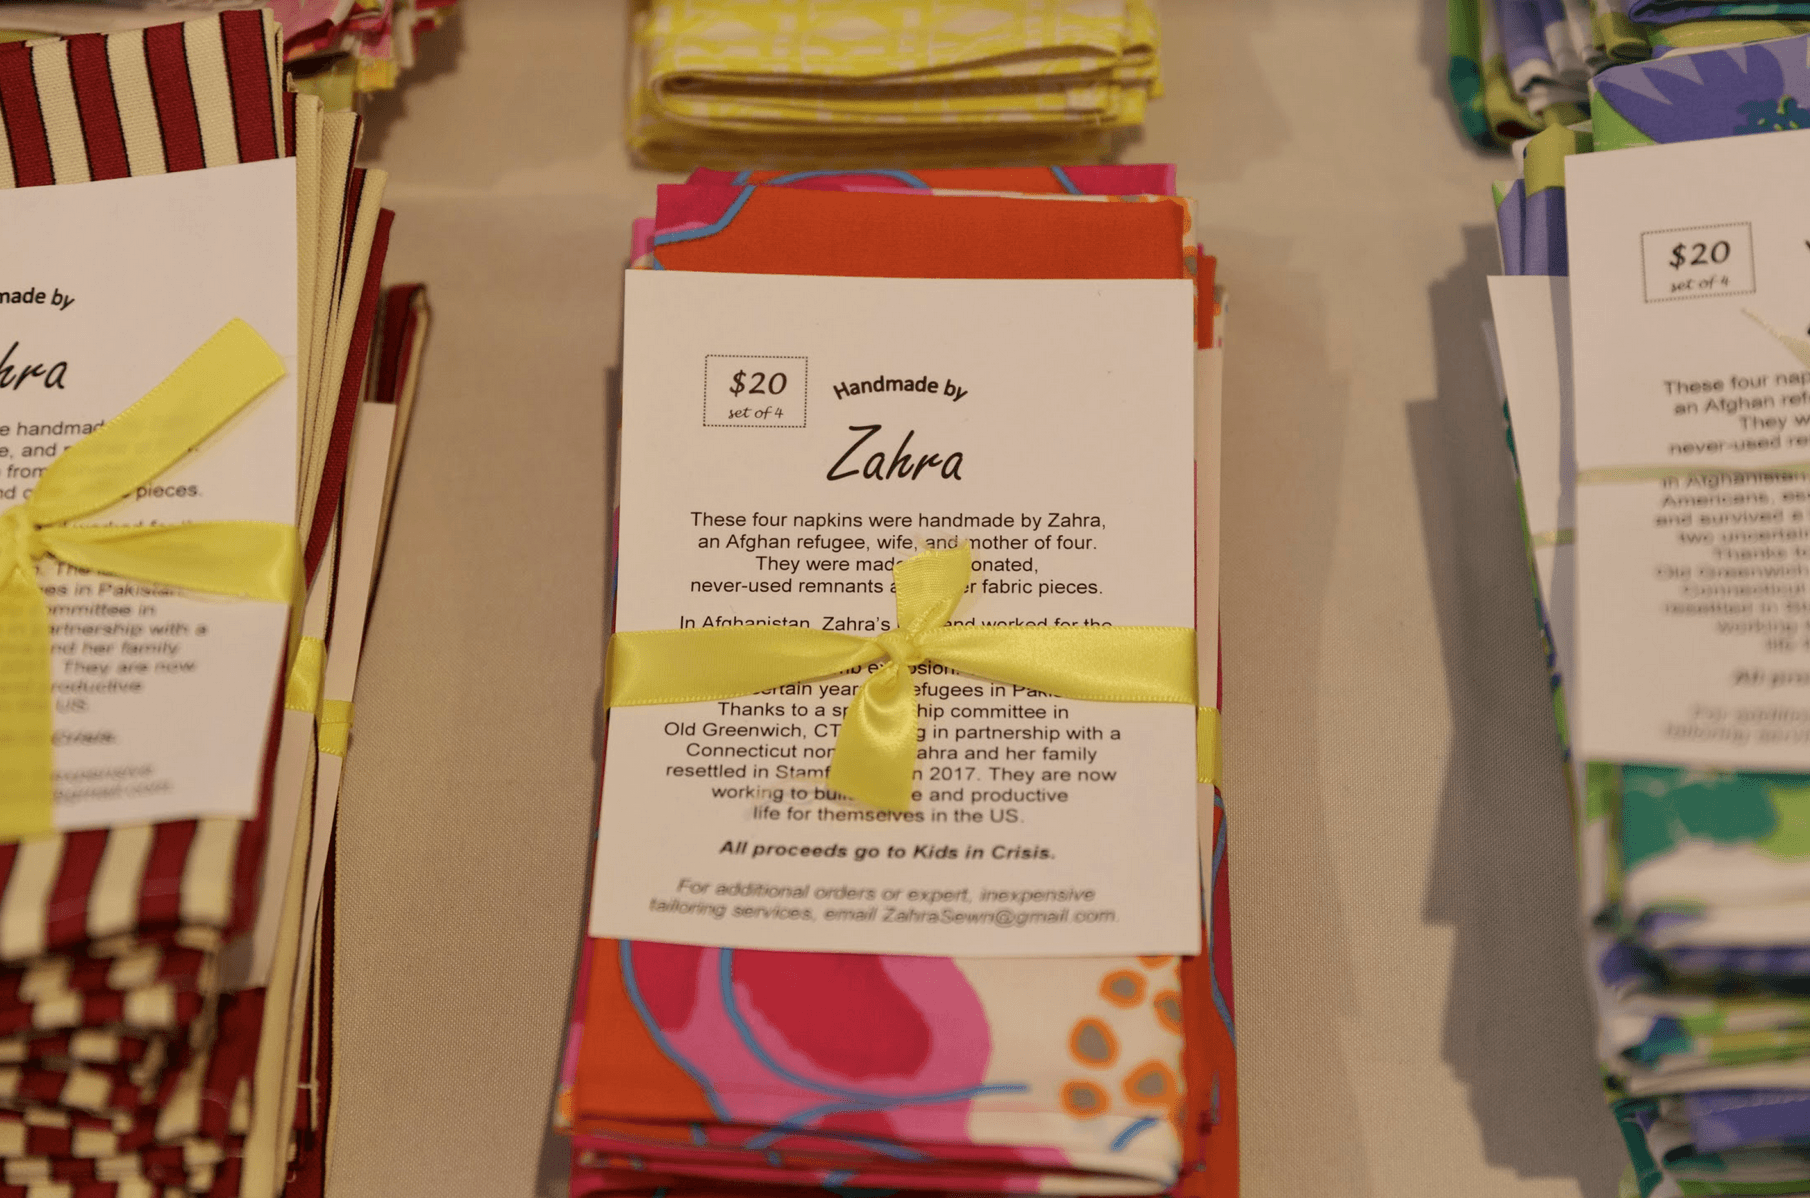 The event featured reusable napkins made by a refugee family from Afghanistan. Contributed phto